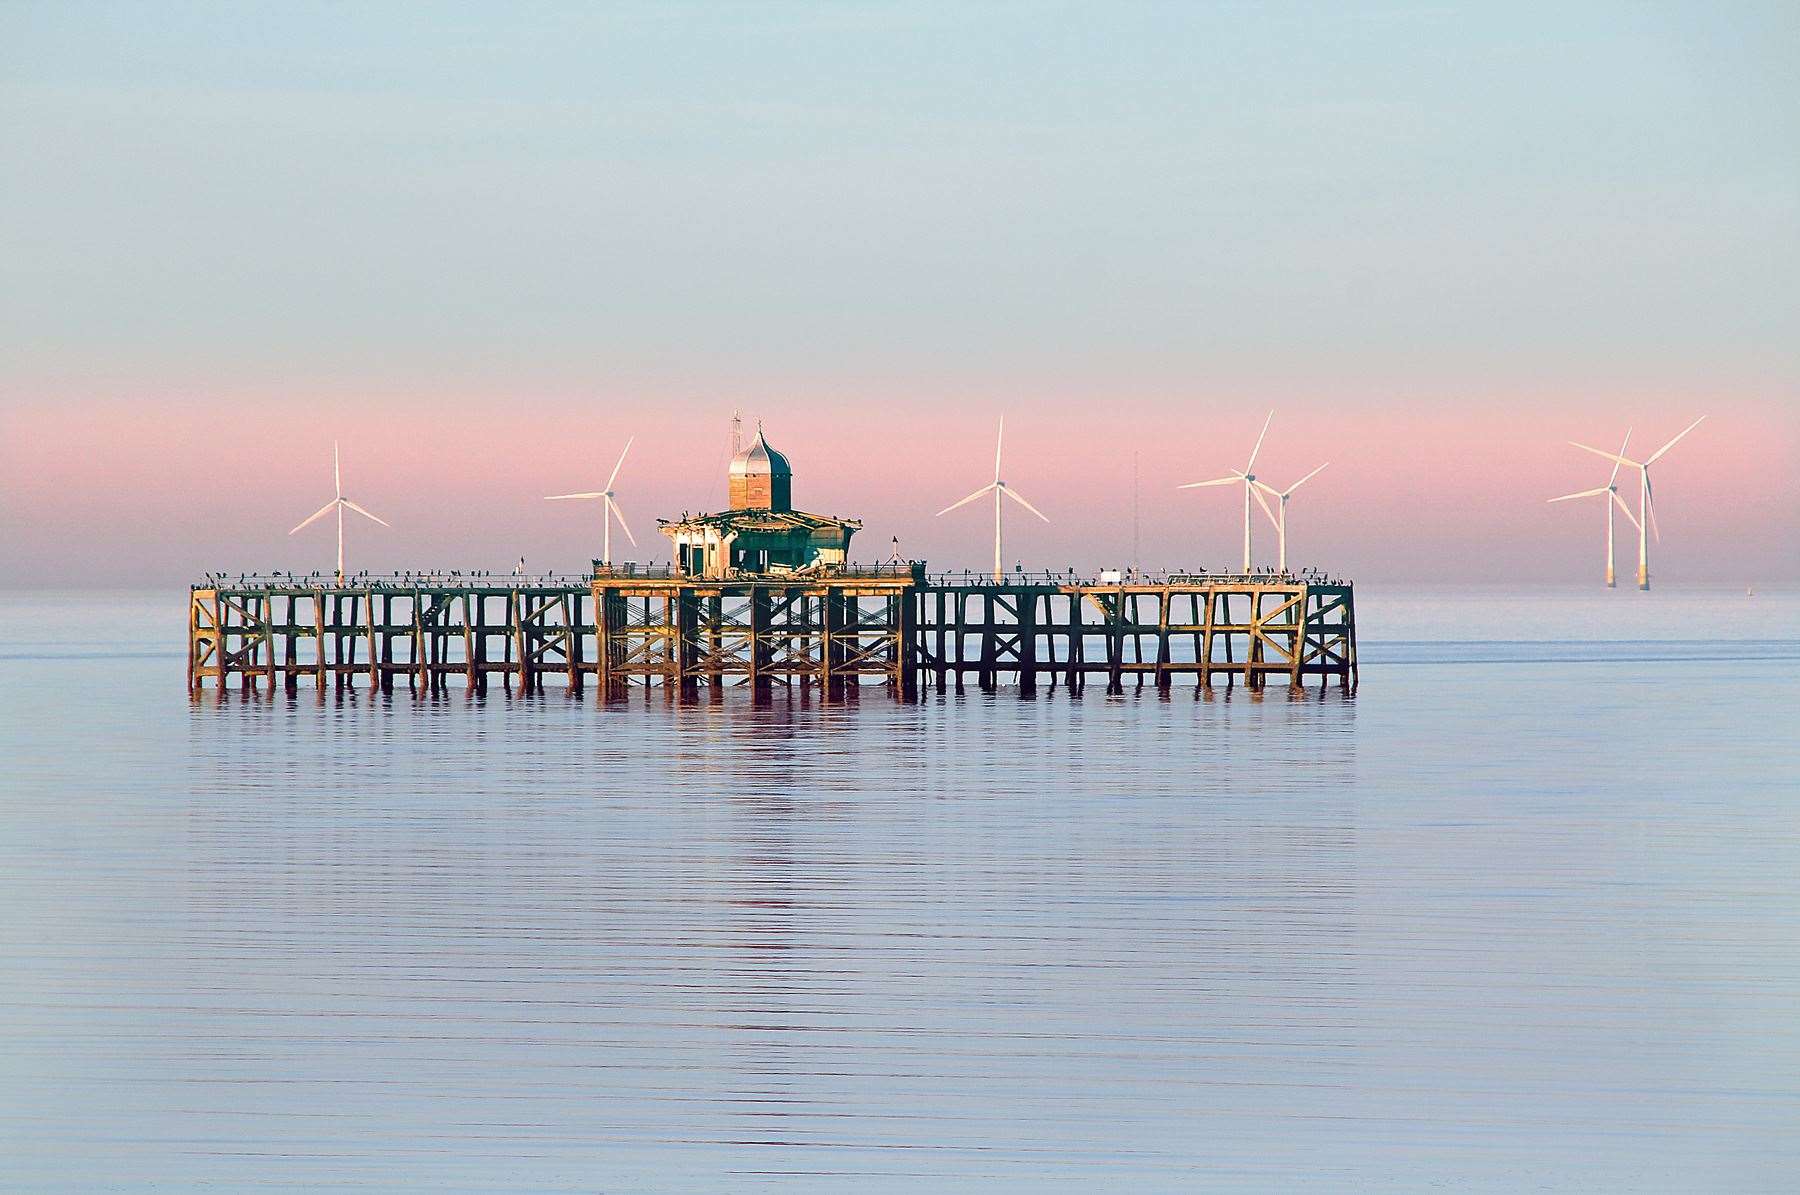 The old pier head off the coast of Herne Bay Pic: Tim Edwards